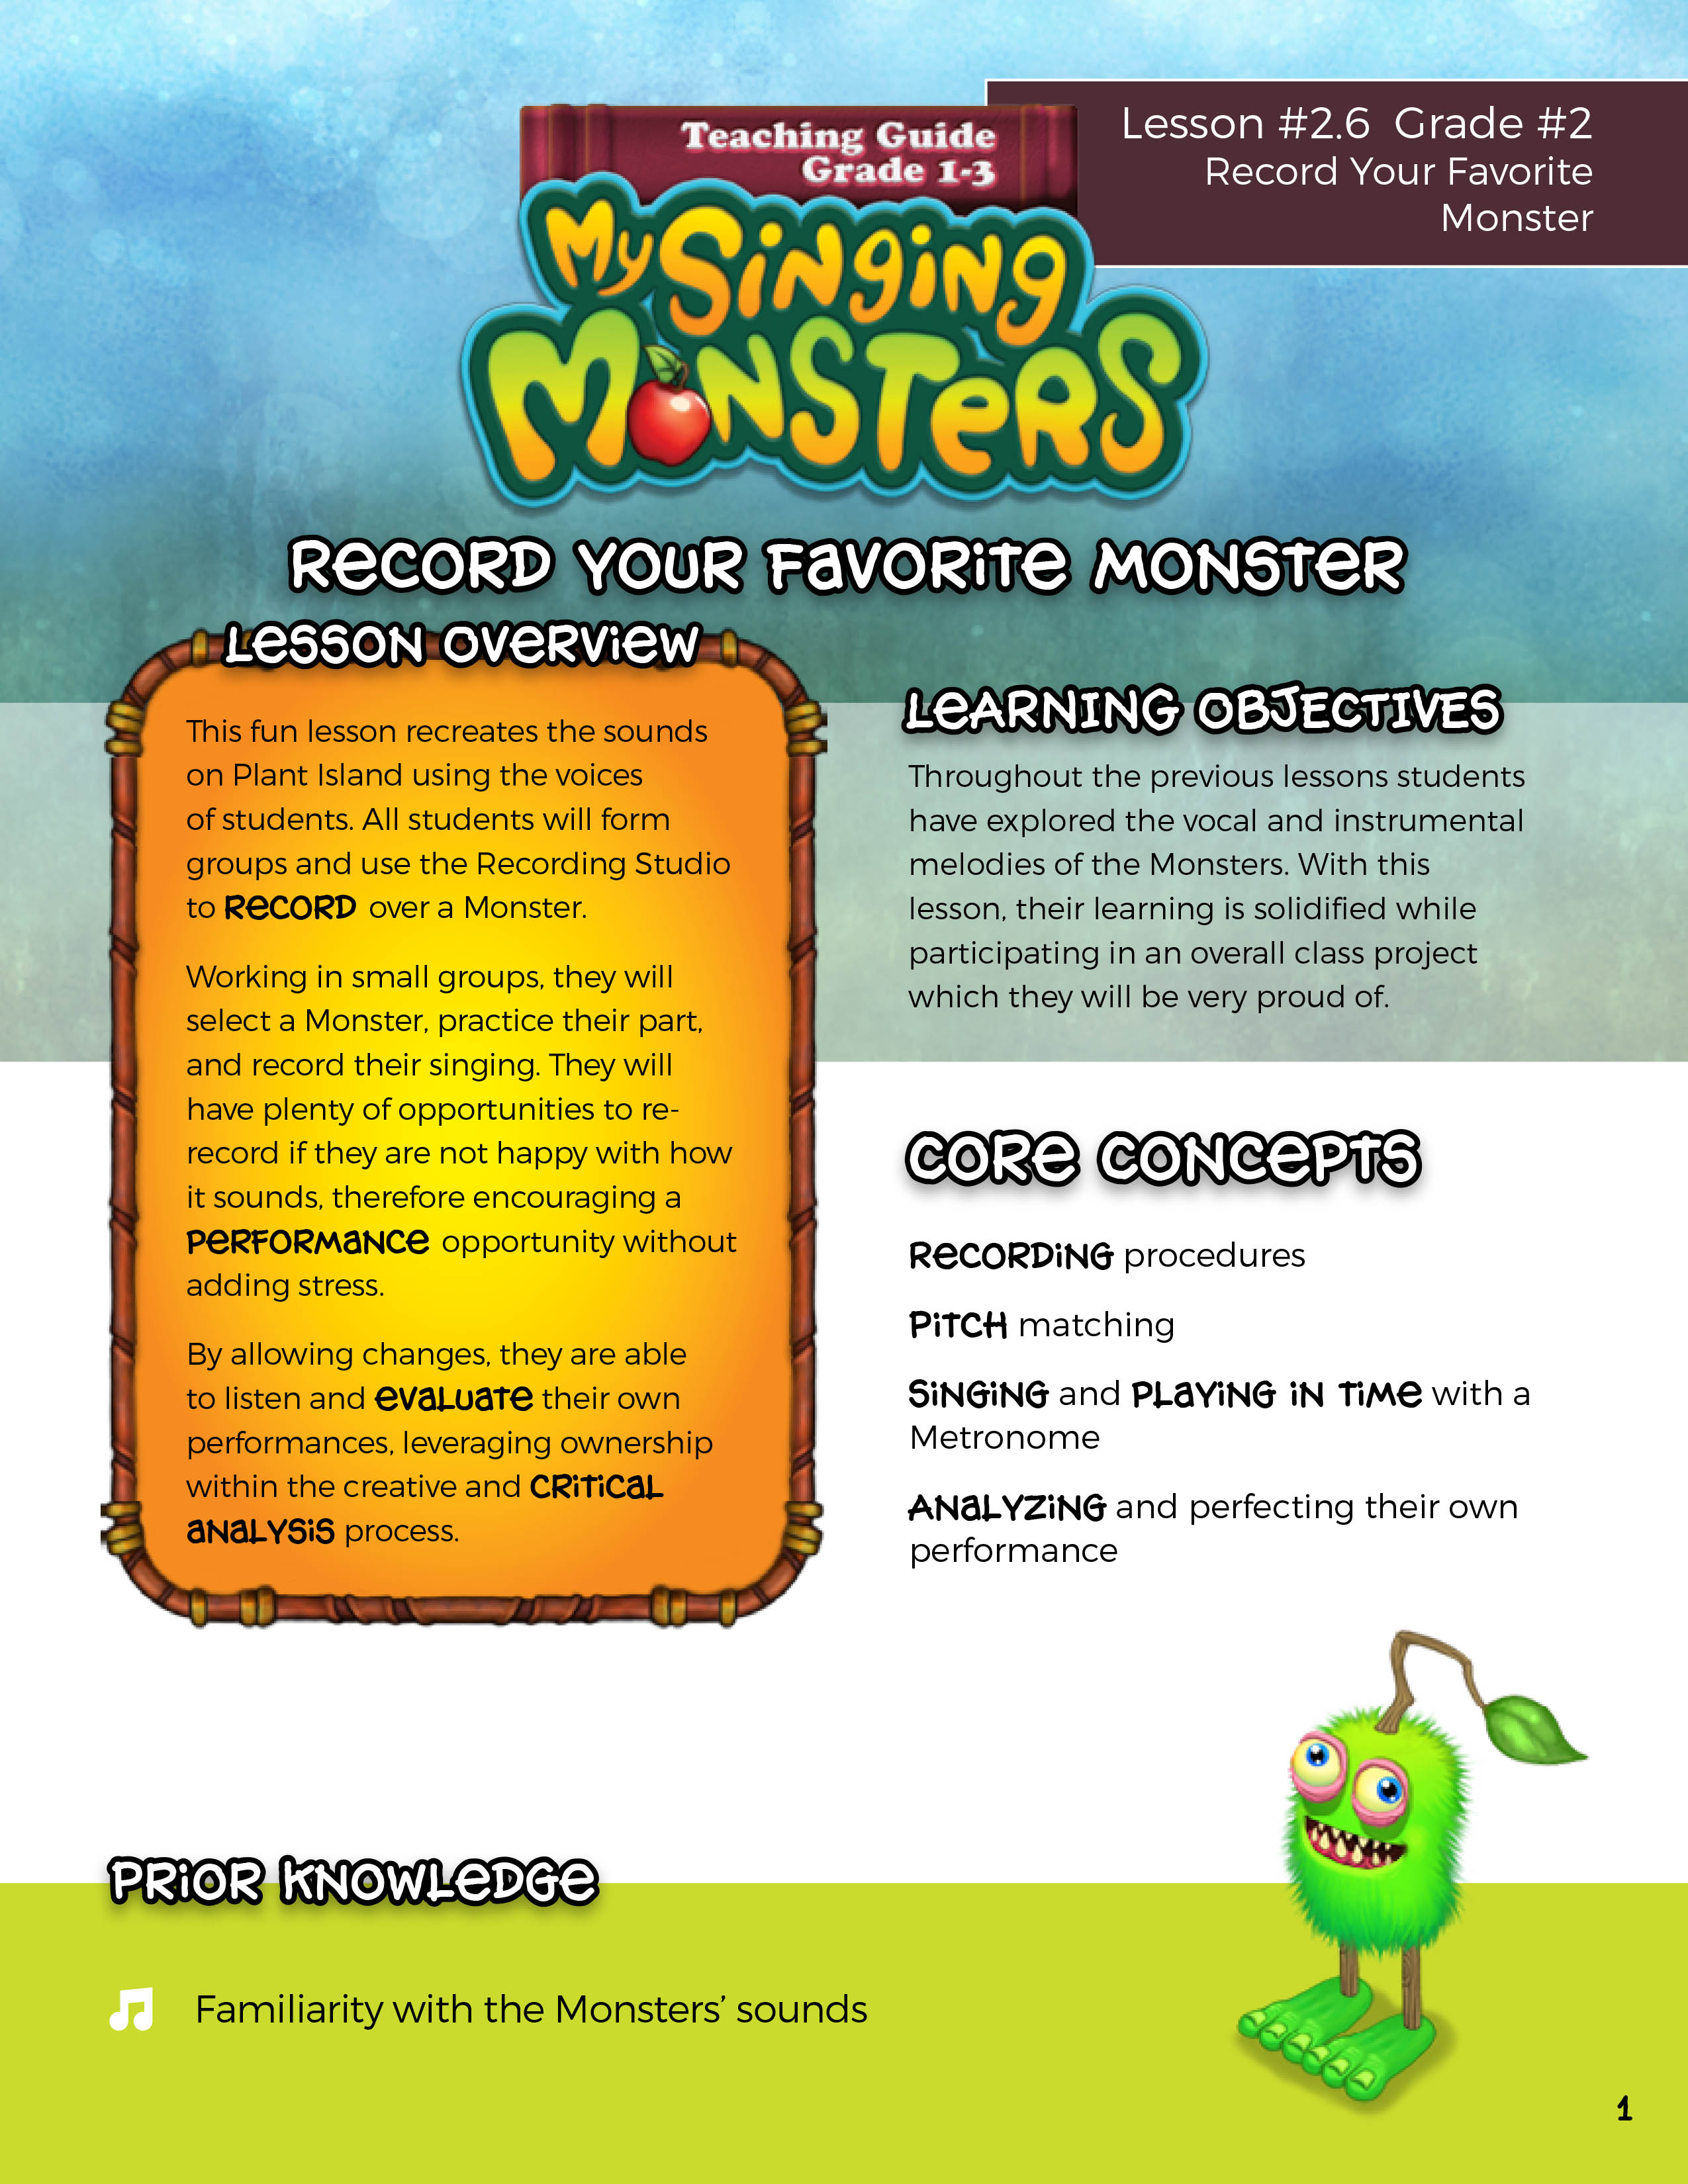 Lesson 2.6 Record Your Favorite Monster